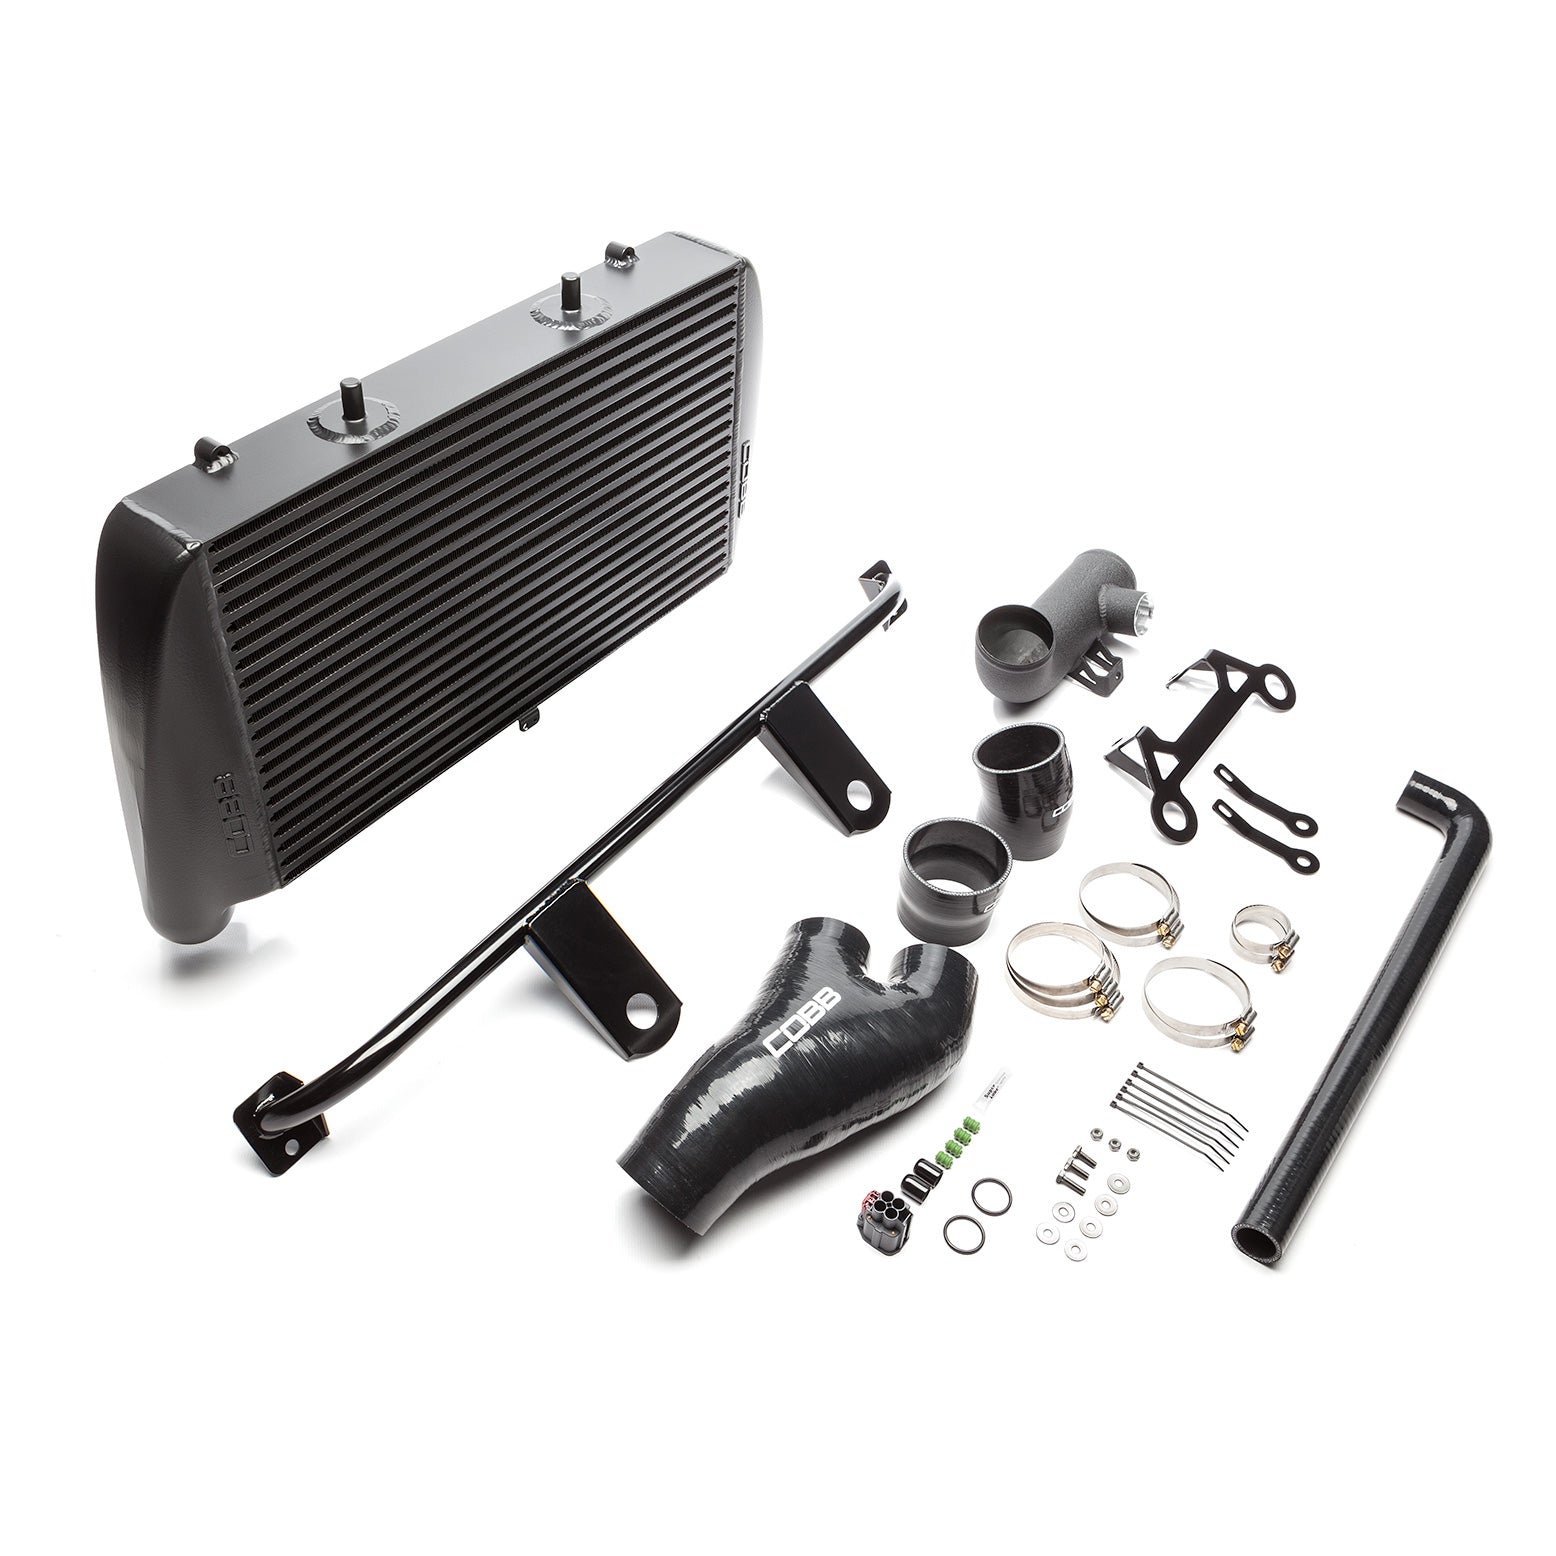 COBB FOR0060020BK-NI FORD Stage 2 Power Package Black F-150 Ecoboost 3.5L 2017-2019 Photo-1 